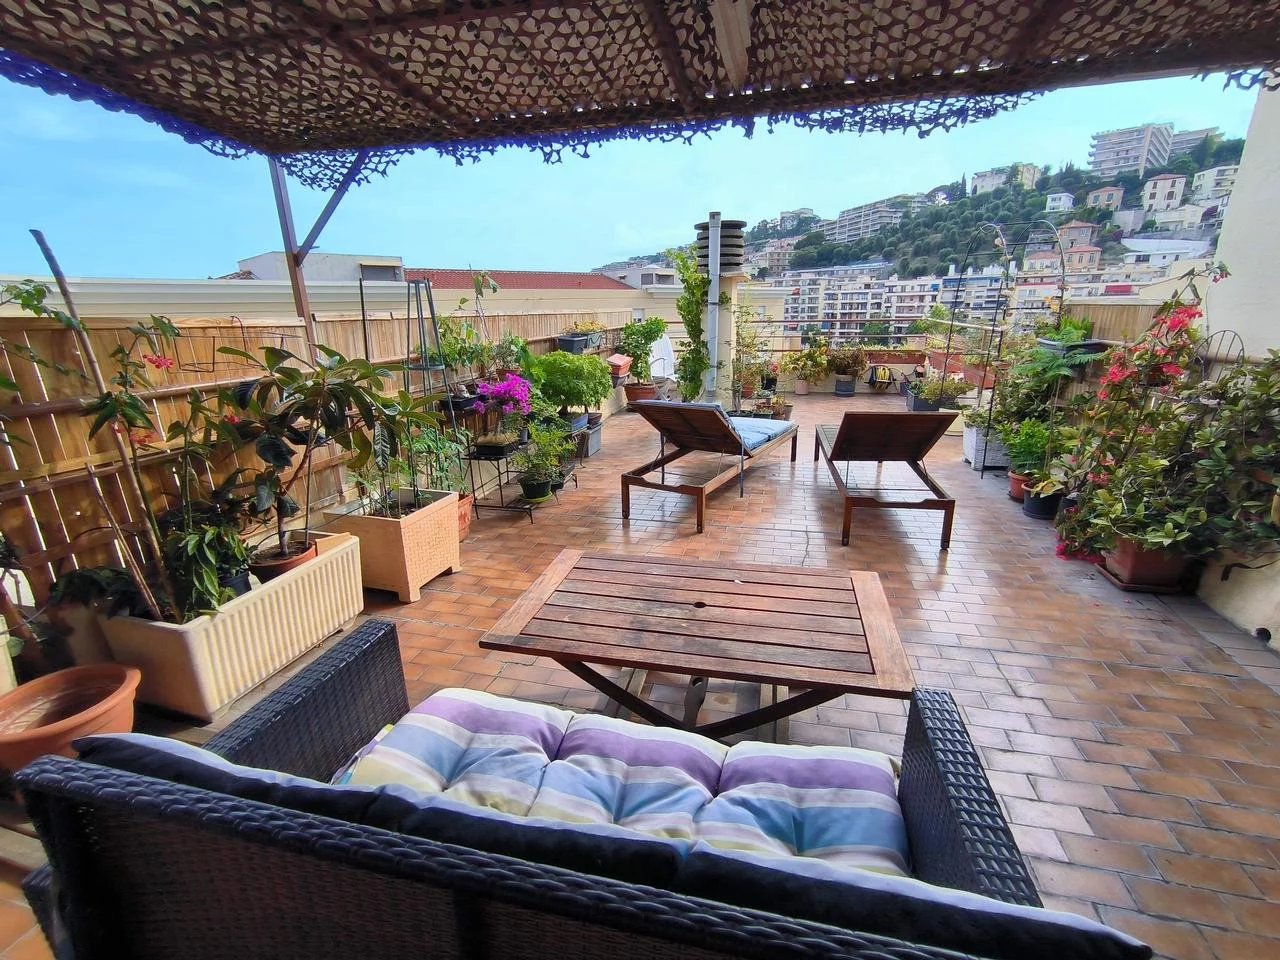 Appartement  4 Rooms 94.03m2  for sale   670 000 €